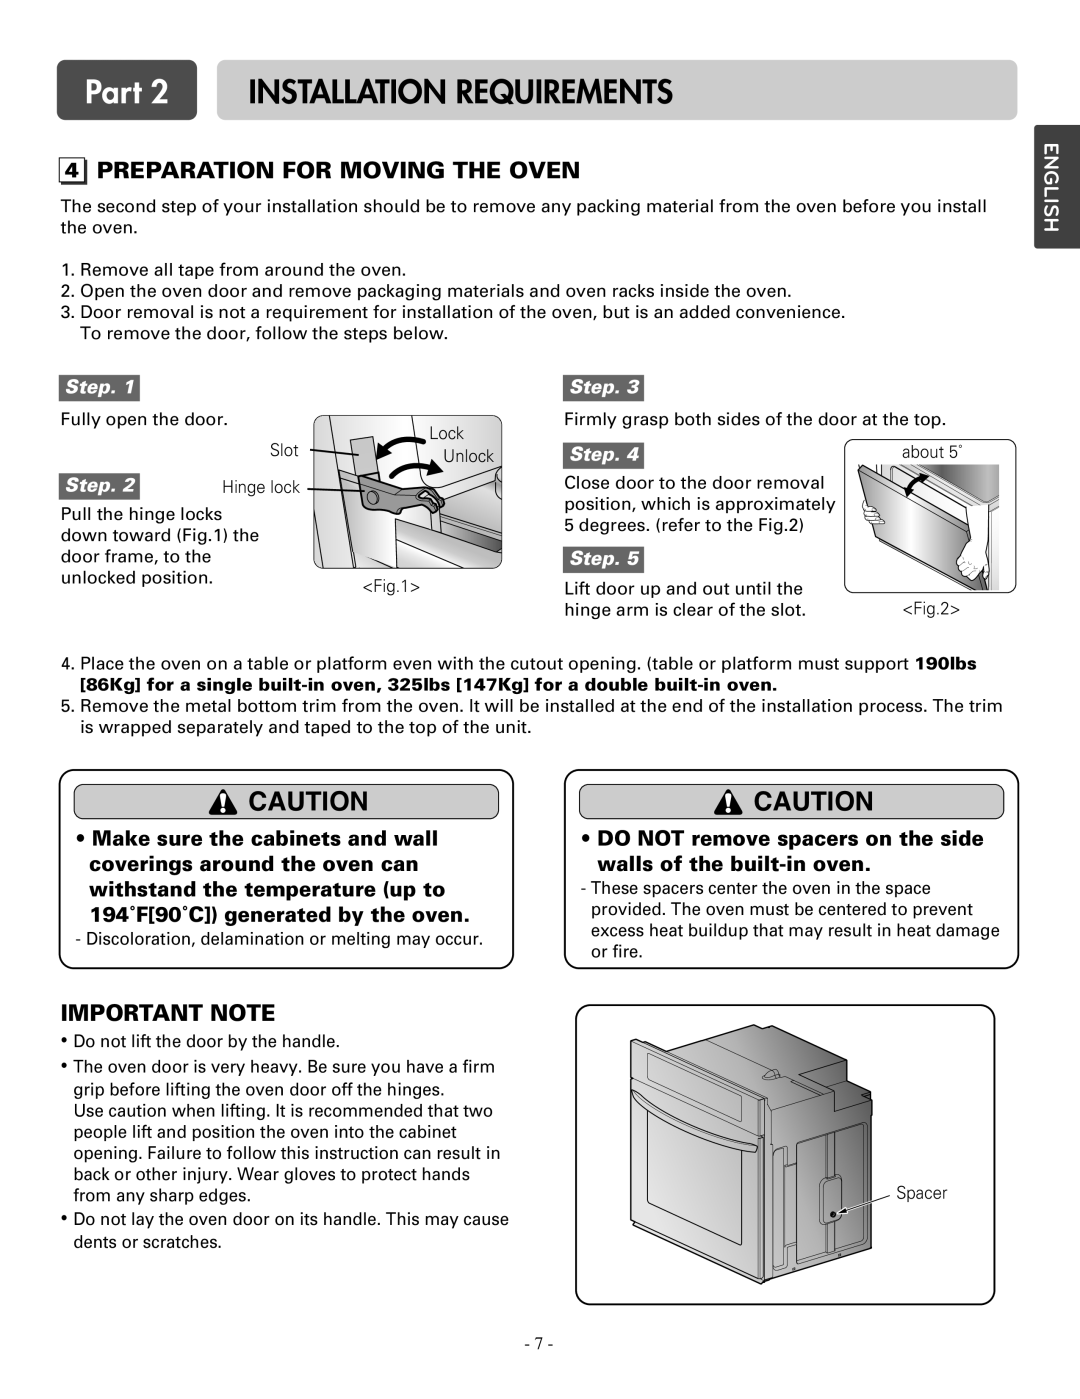 LG Electronics LWD3010ST Preparation For Moving The Oven, Part 2 INSTALLATION REQUIREMENTS, Important Note, English 